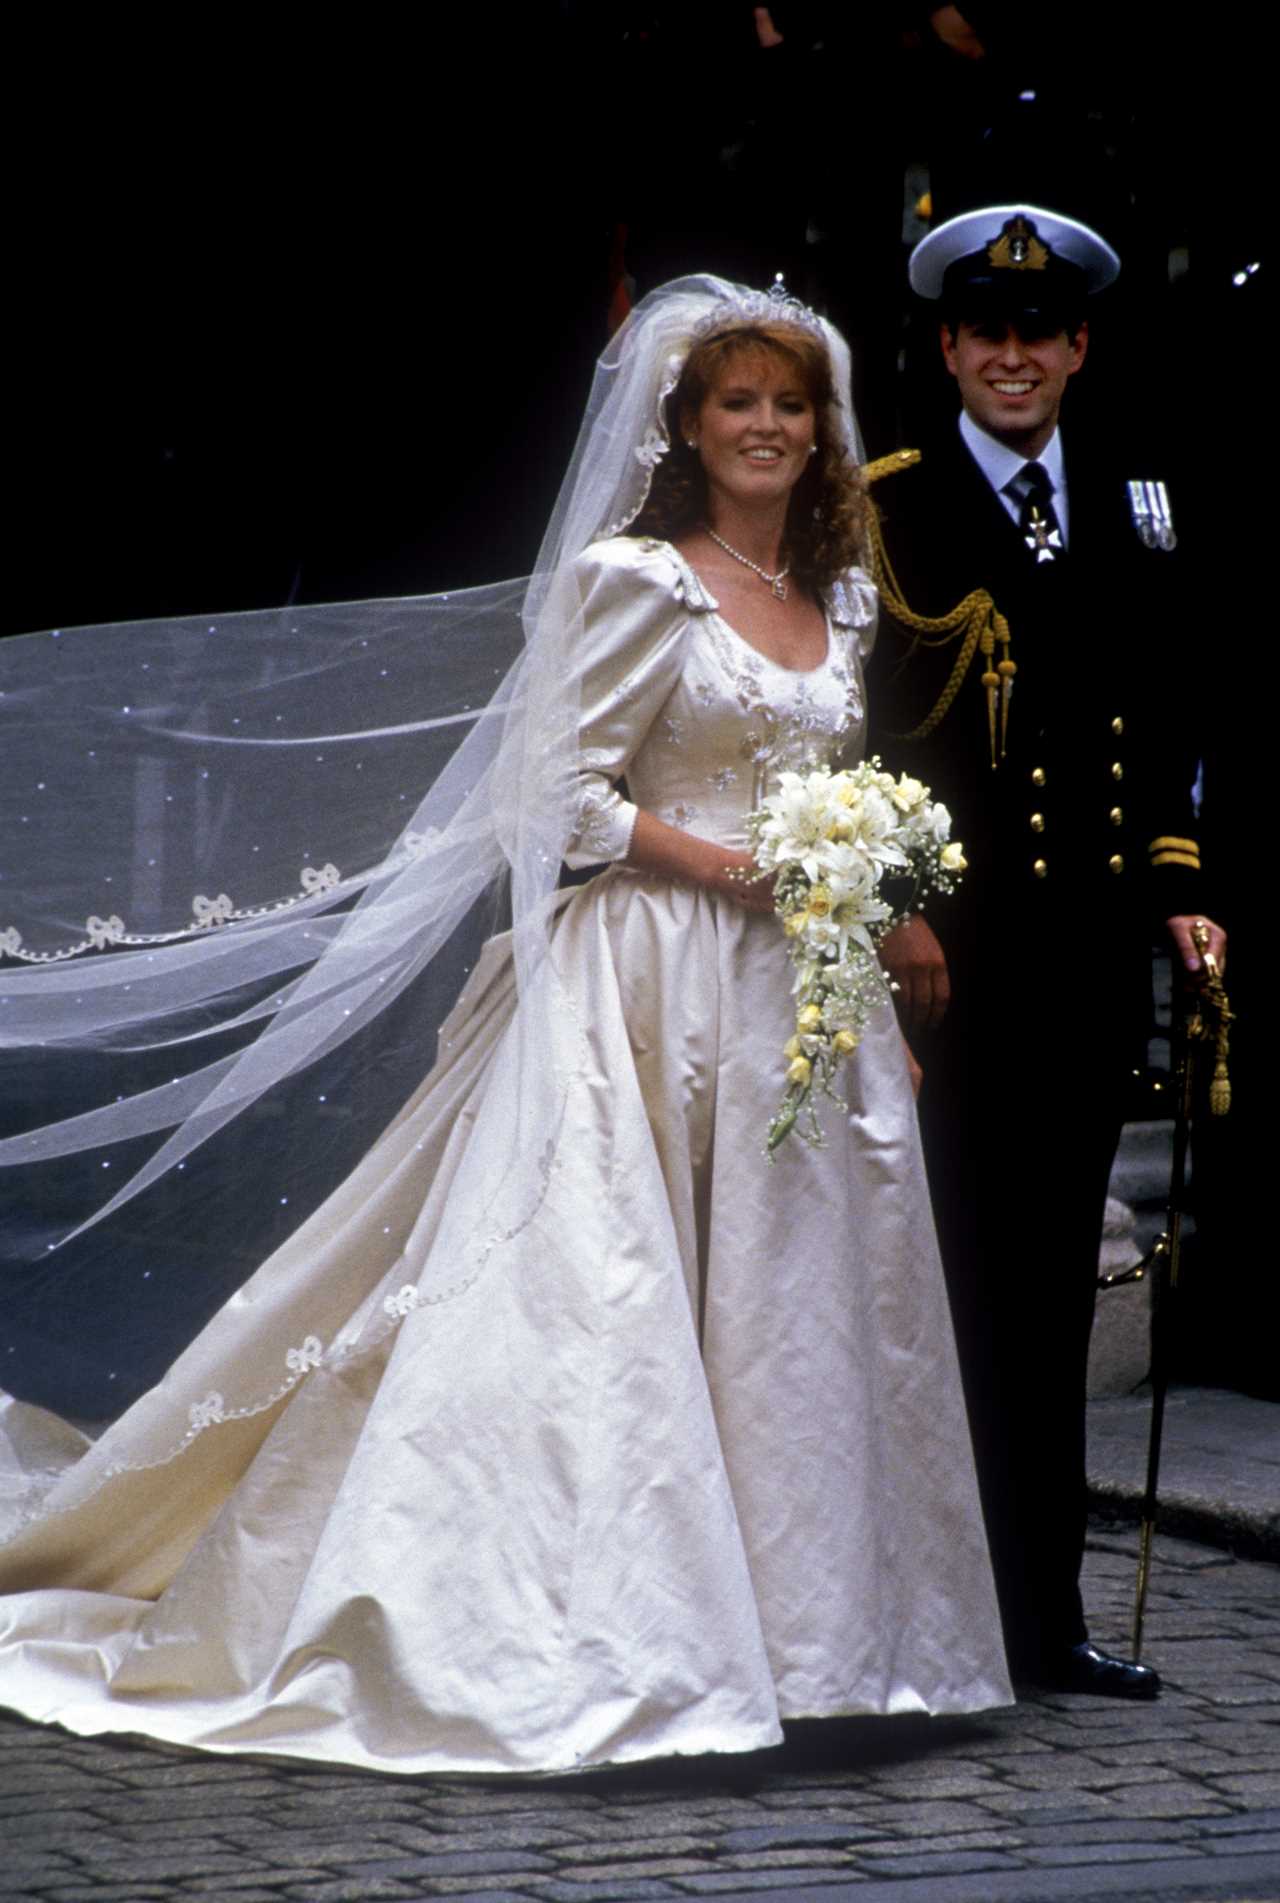 Prince Andrew kept Fergie’s wedding dress in his wardrobe at Buckingham Palace after they divorced